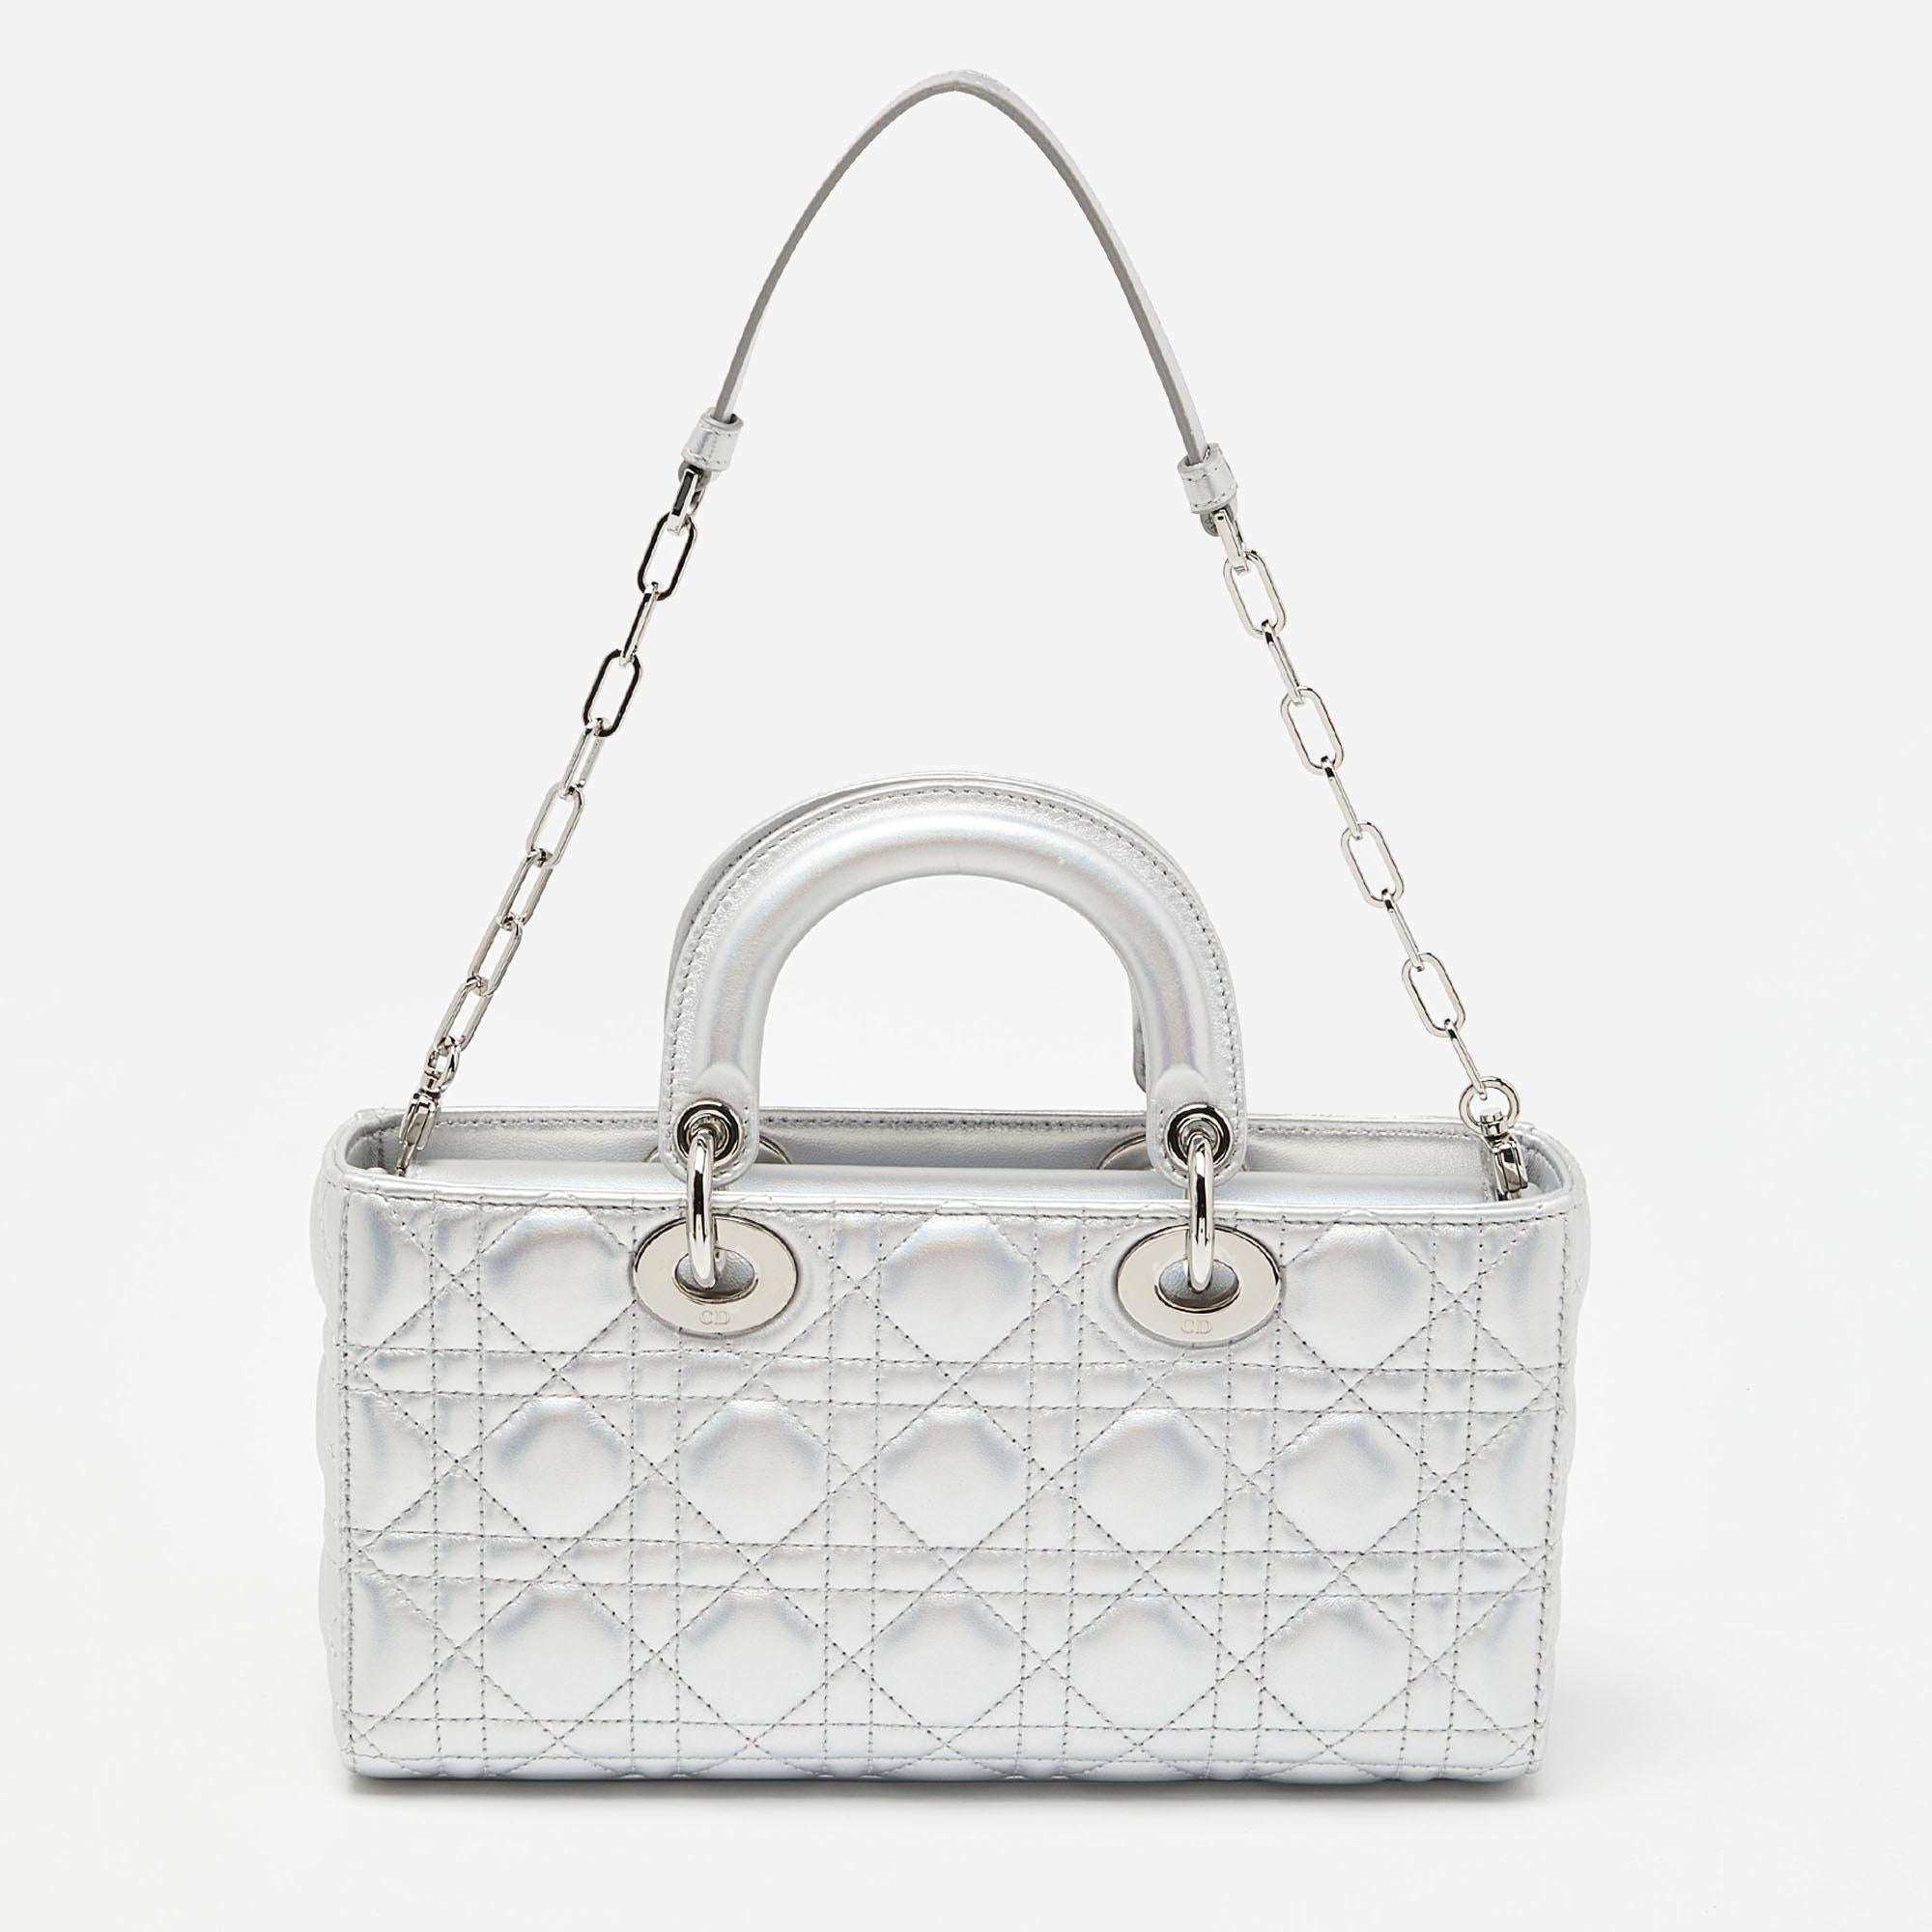 The Dior Lady D-Joy Tote epitomizes luxury with its signature quilted pattern and metallic finish. The medium-sized tote features impeccable craftsmanship, a spacious interior, and iconic Dior charm, making it a timeless and sophisticated accessory